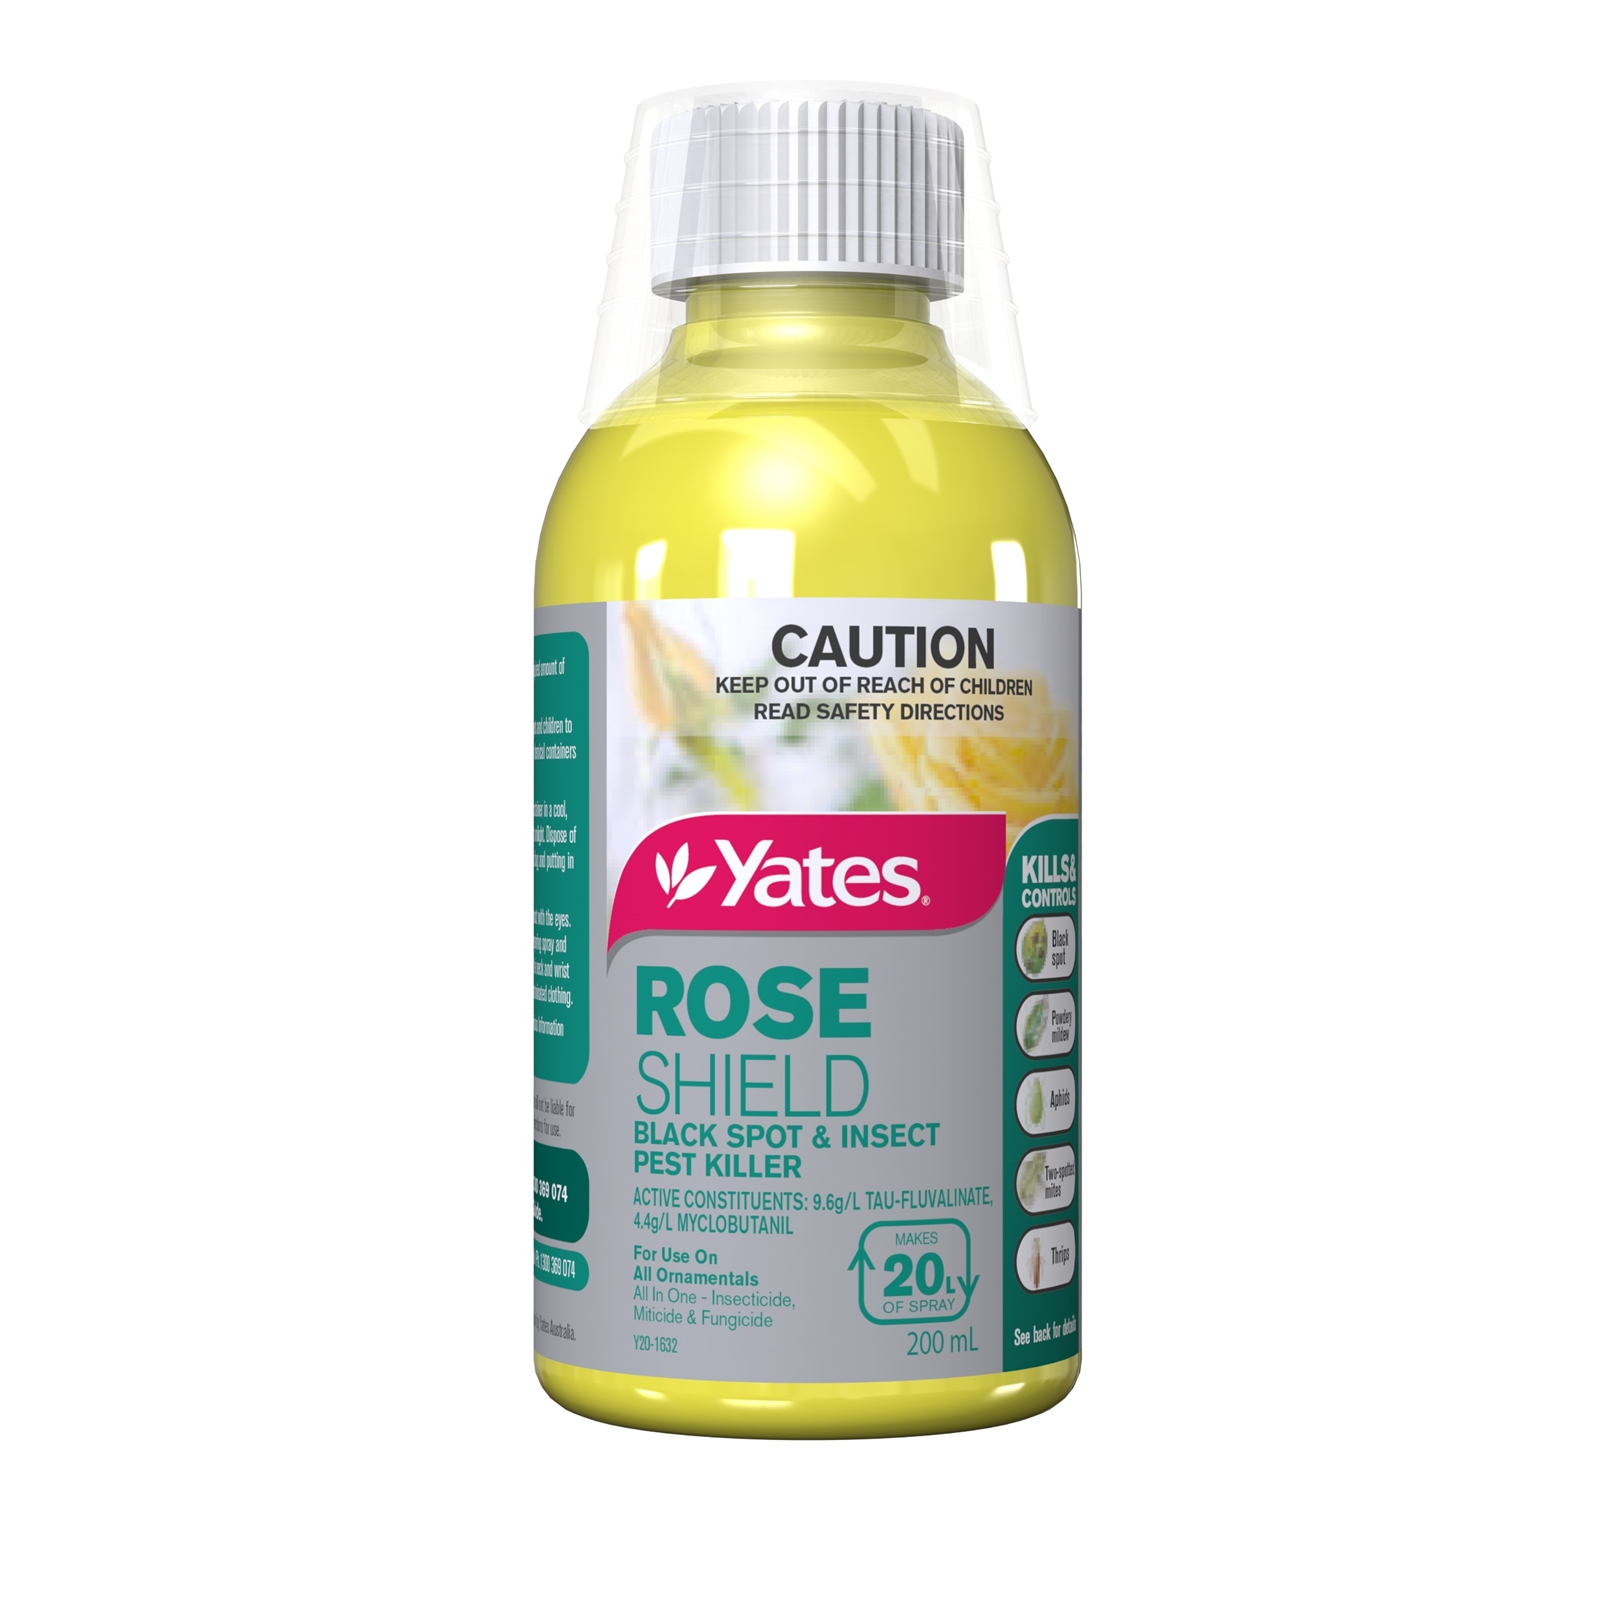 Yates 200ml Rose Shield Pesticide Concentrate